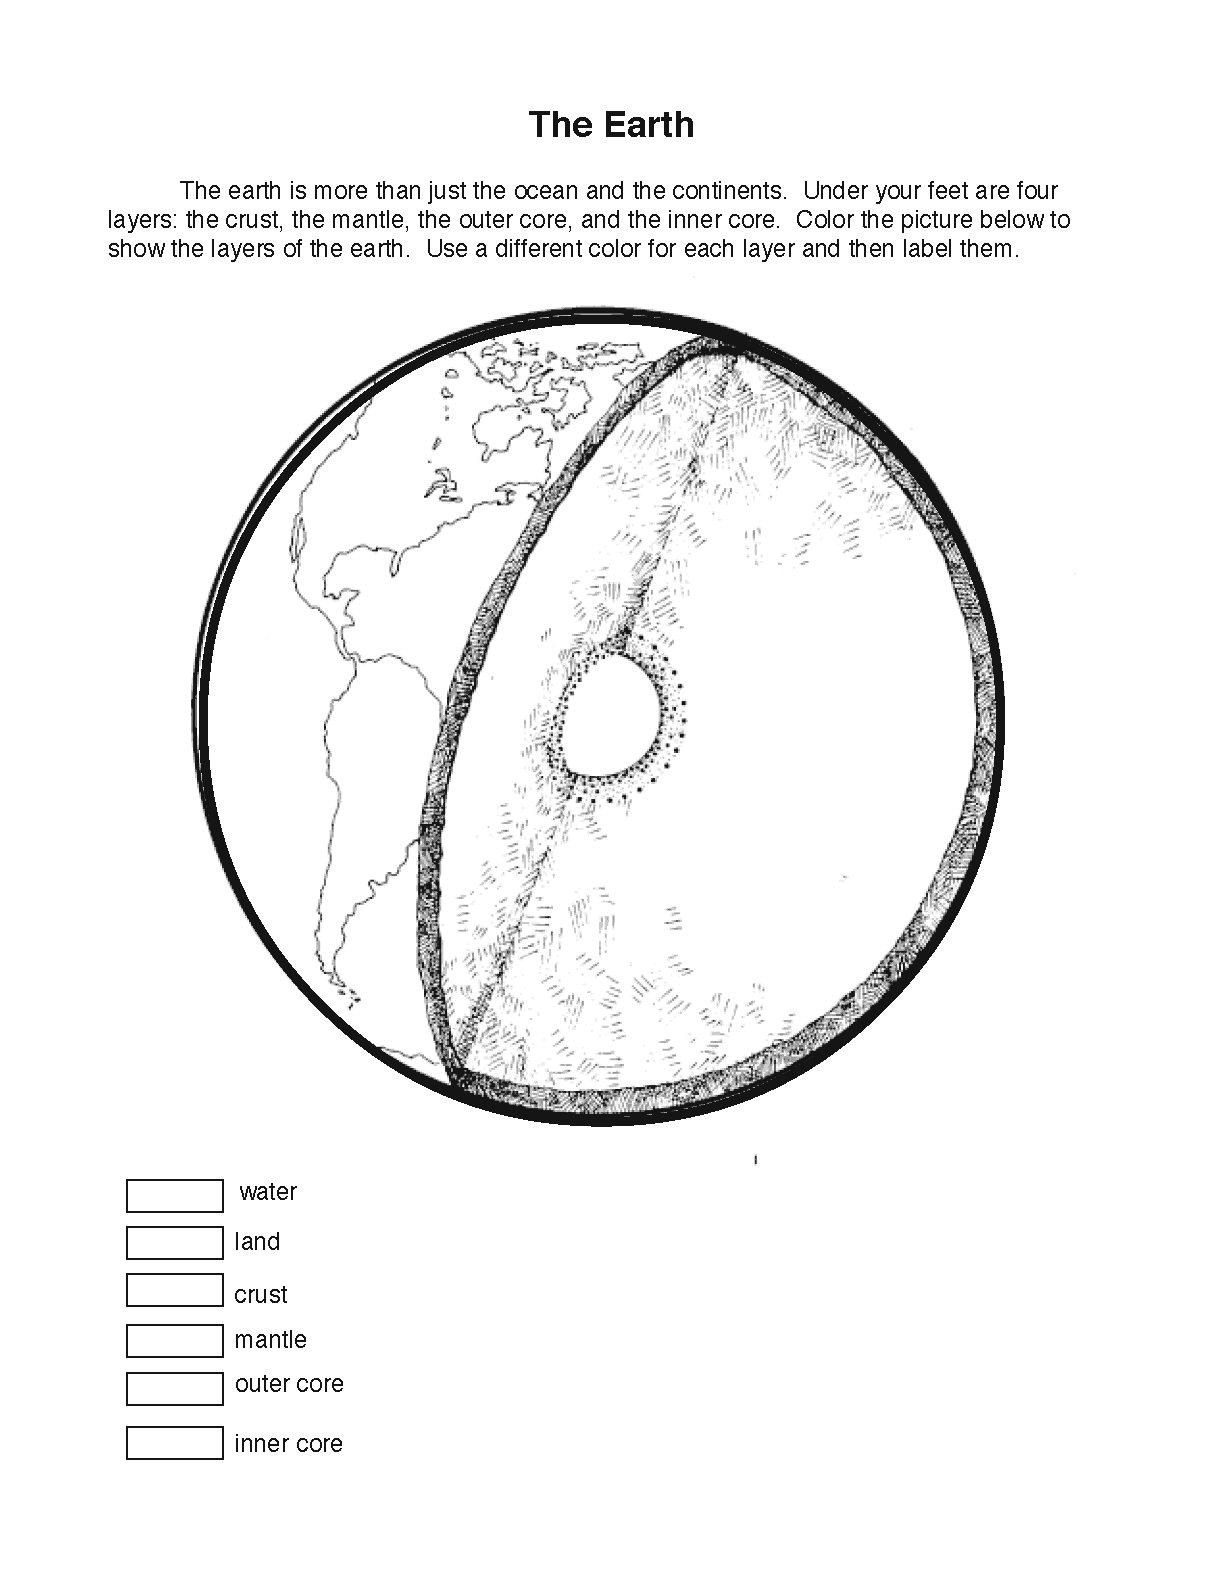 Layers coloring sheet montessori. Geology clipart the earth layer